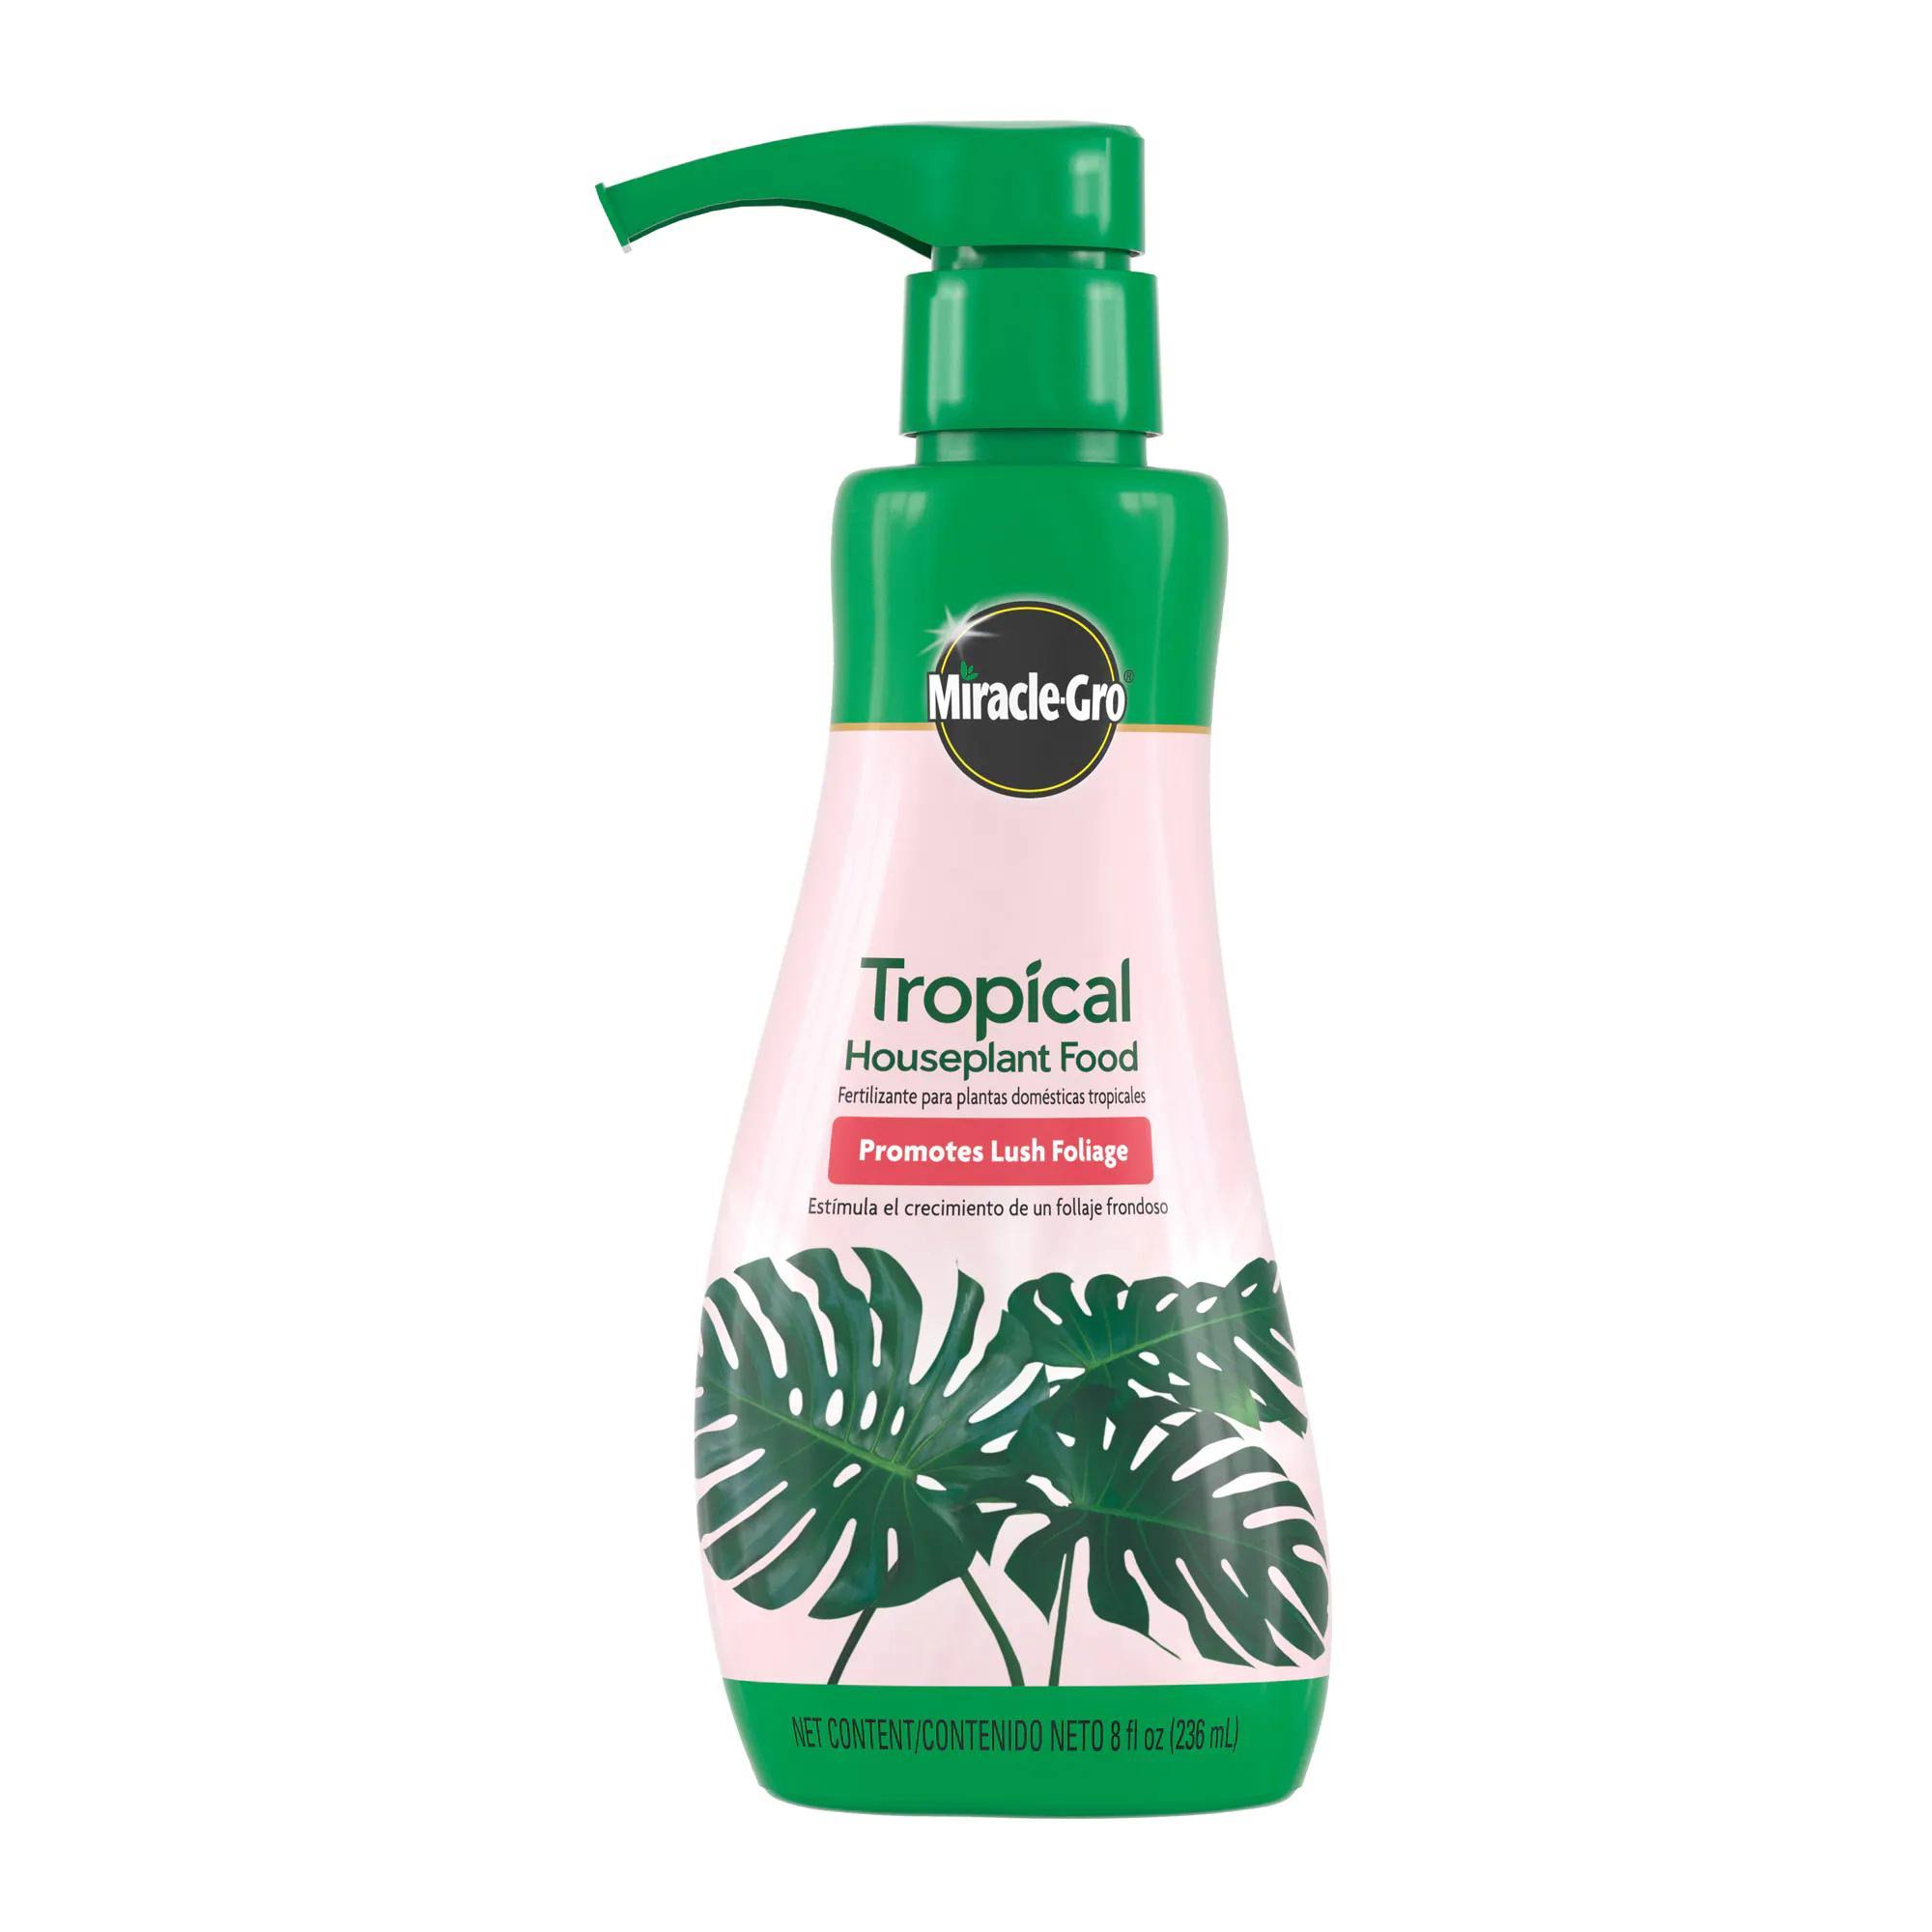 Miracle-Gro 4005906 Indoor and Outdoor Tropical Houseplant Food 8 fl oz